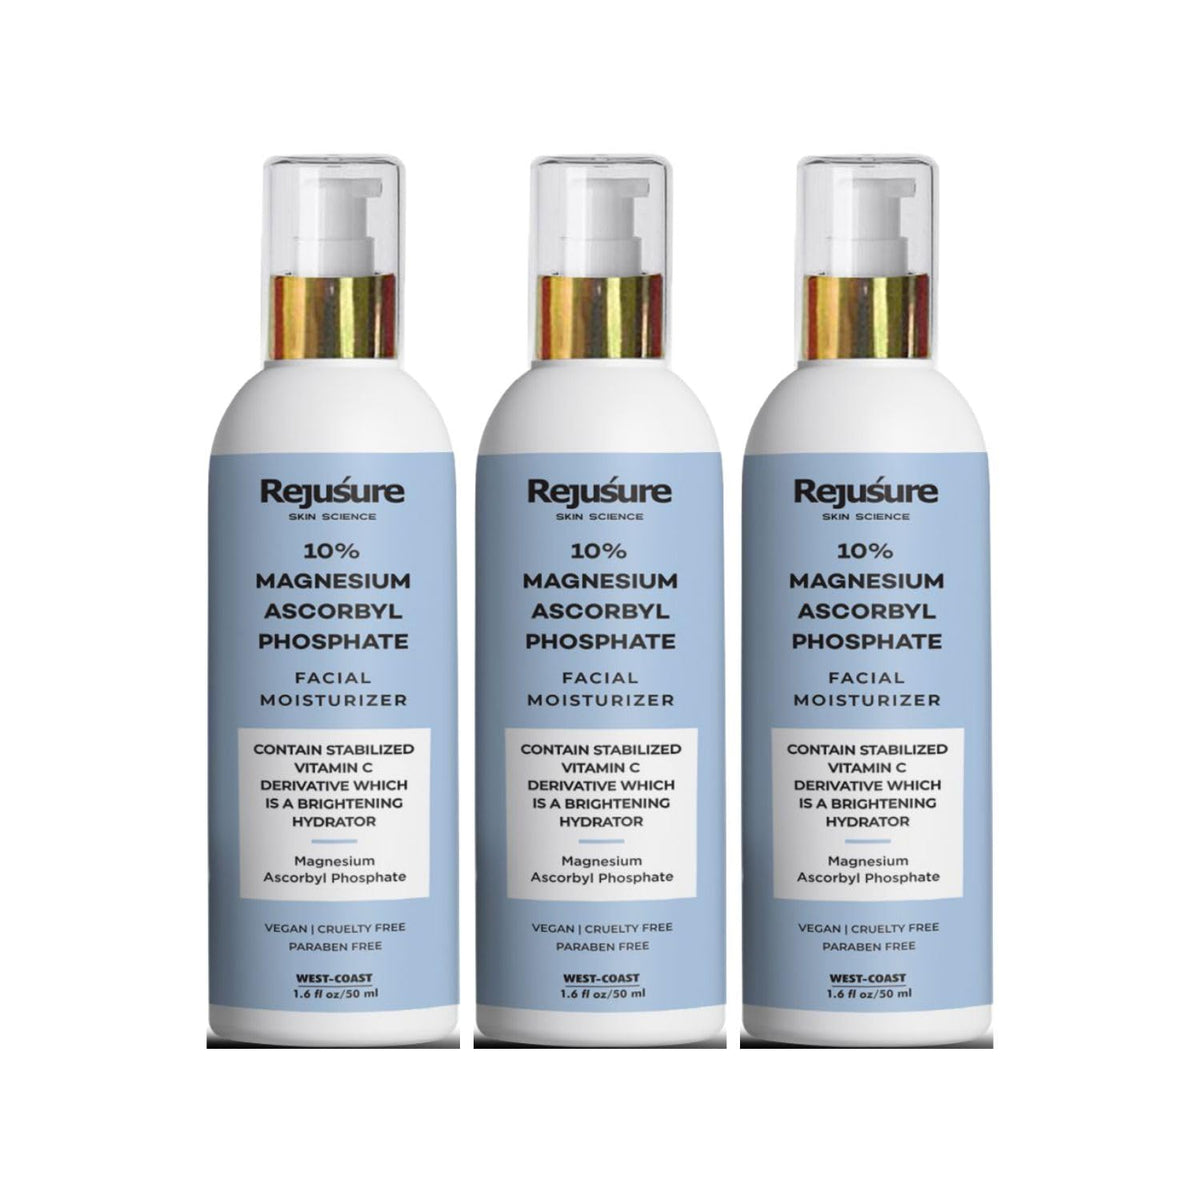 Rejusure 10% Magnesium Ascorbyl Phosphate Facial Moisturizer For Brightening & Hydrating – 50ml (Pack of 3)